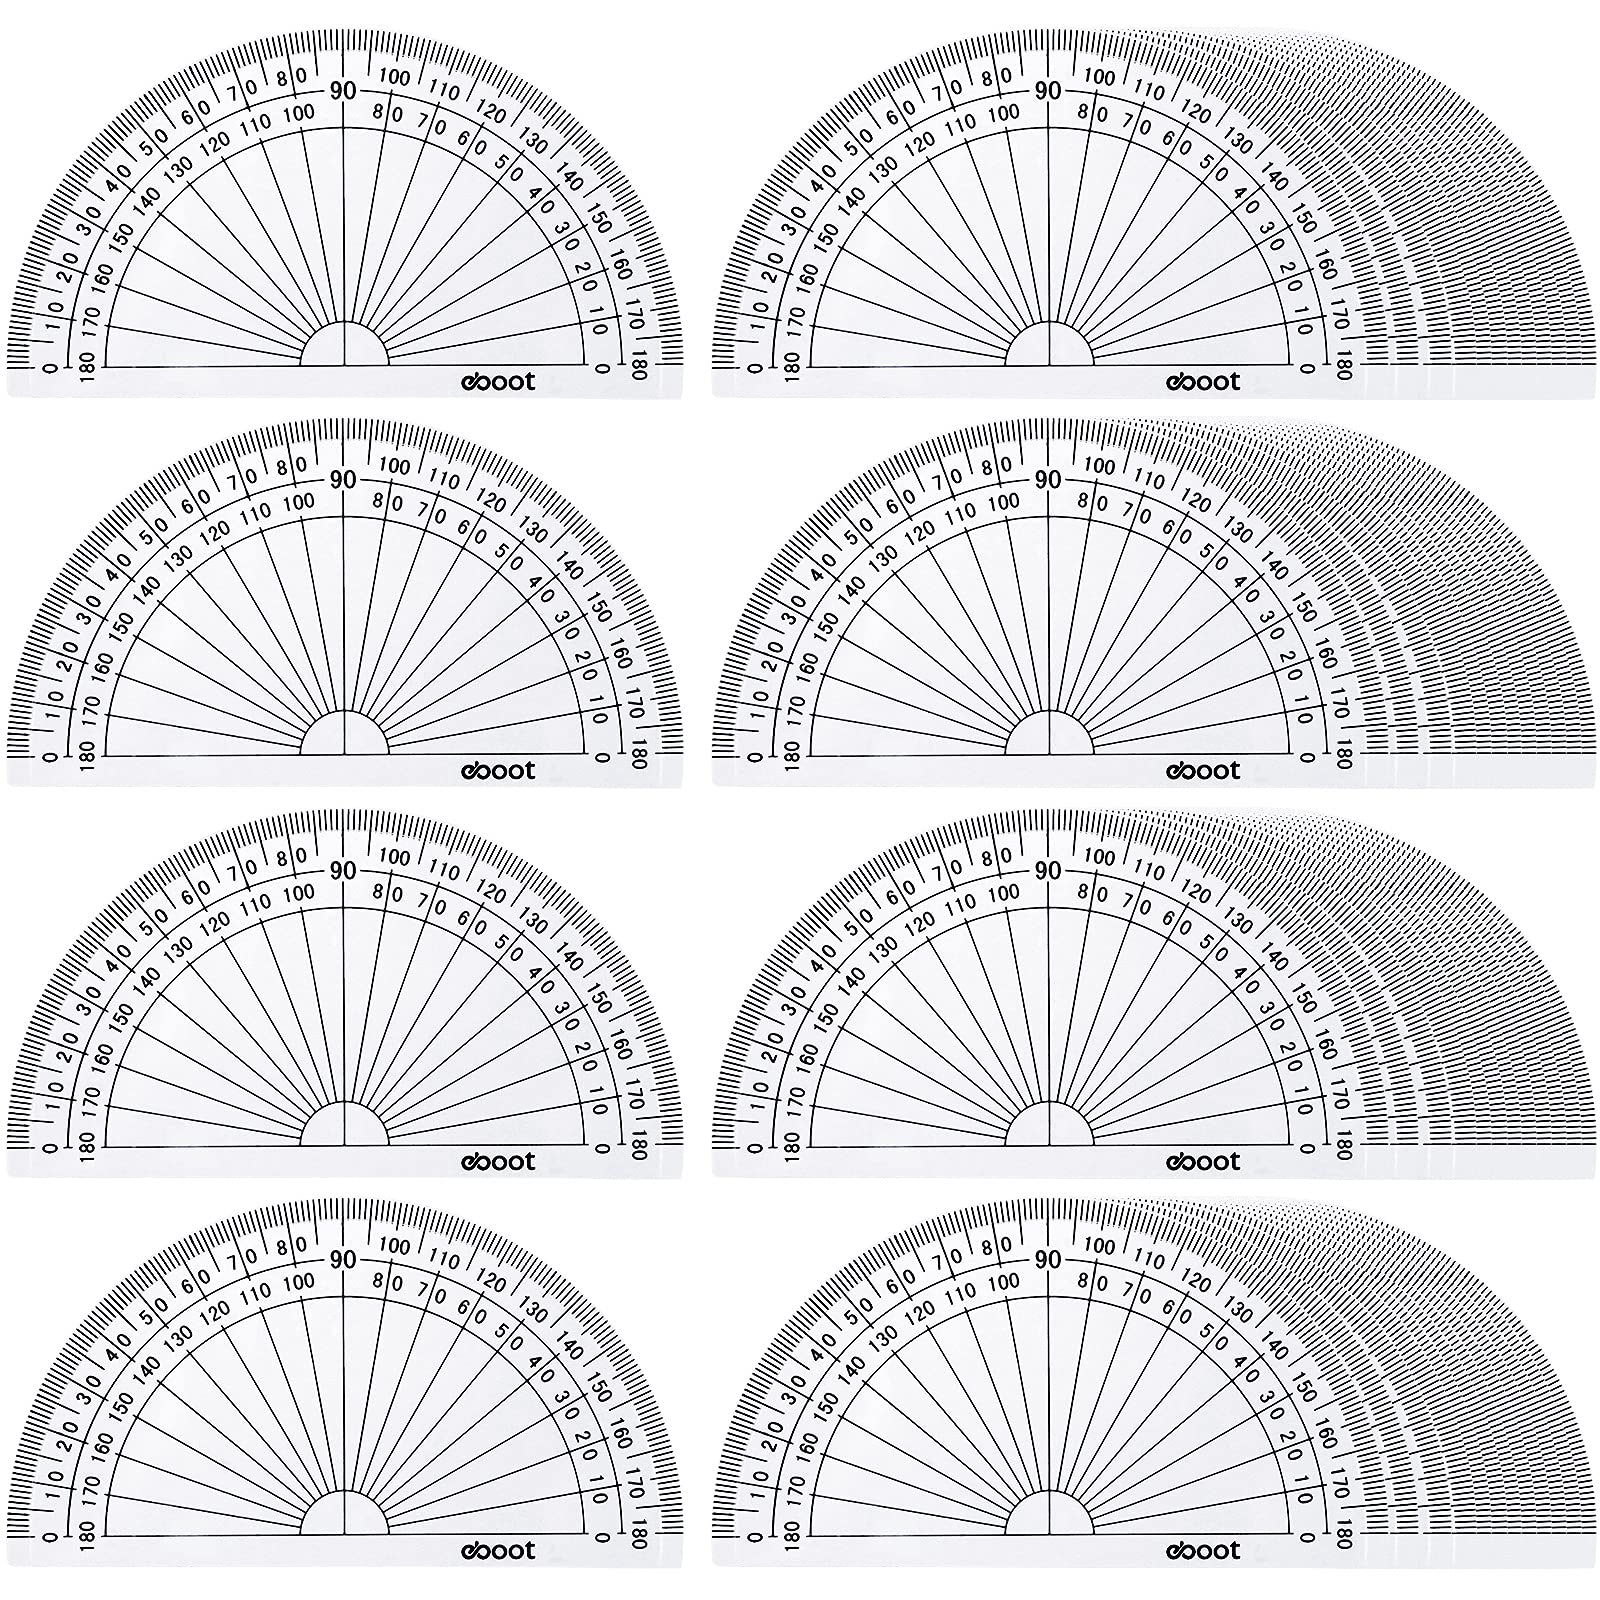 Eboot pack math protractors plastic protractor degrees inches clear office products